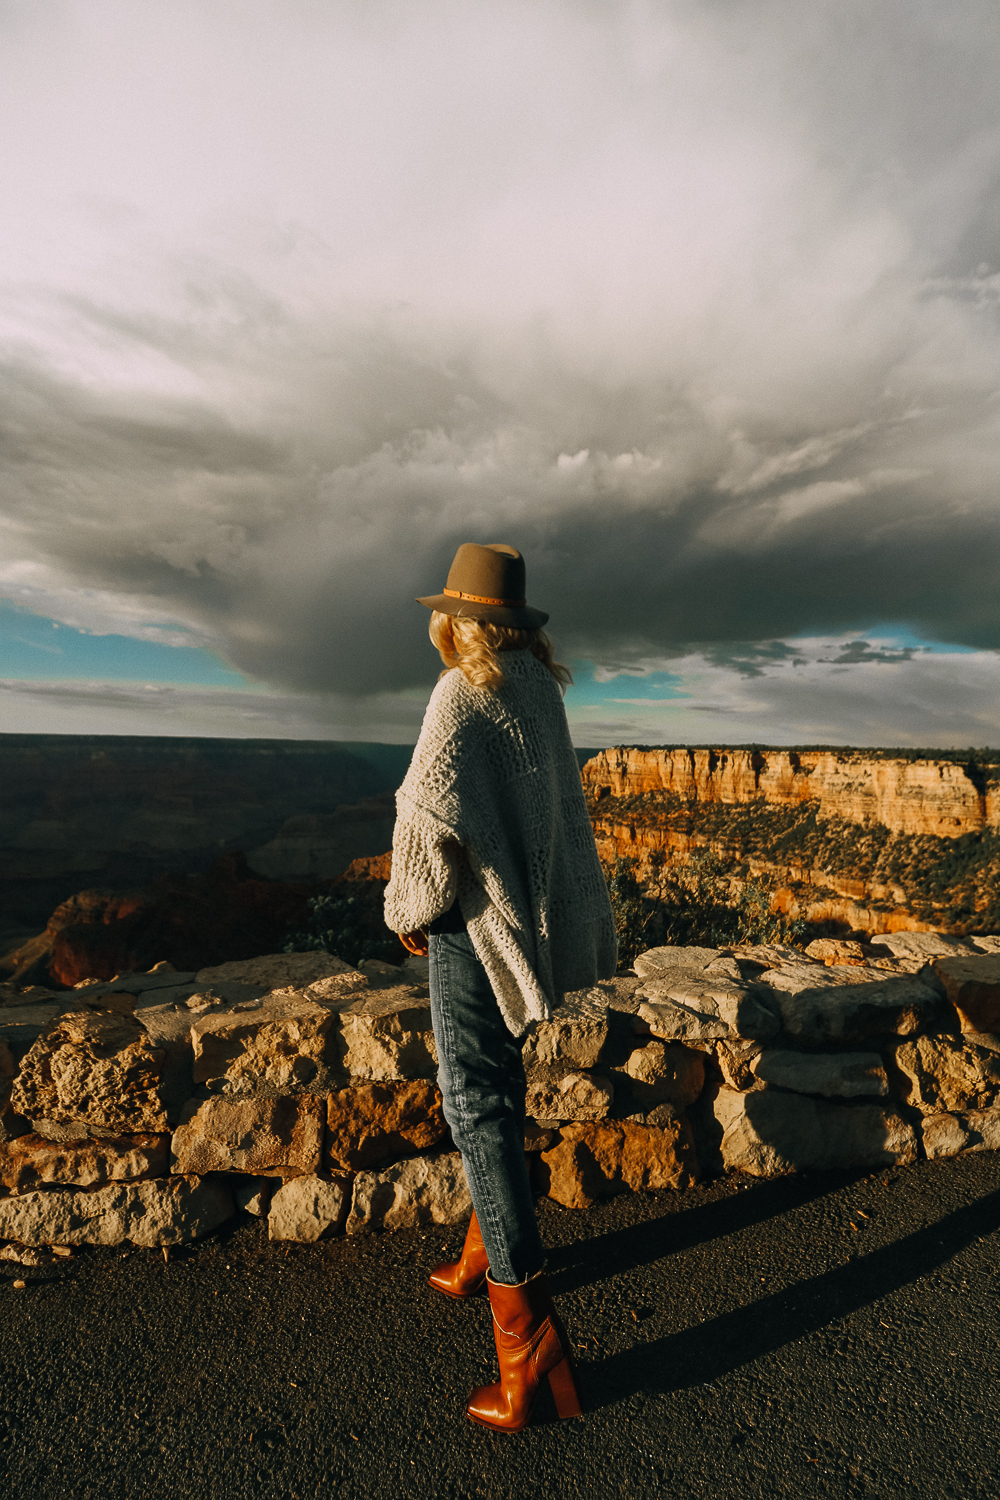 Grand Canyon Rim Trail featuring fashion blogger Erin Busbee of BusbeeStyle.com wearing camel culottes, white turtleneck and a brown hat